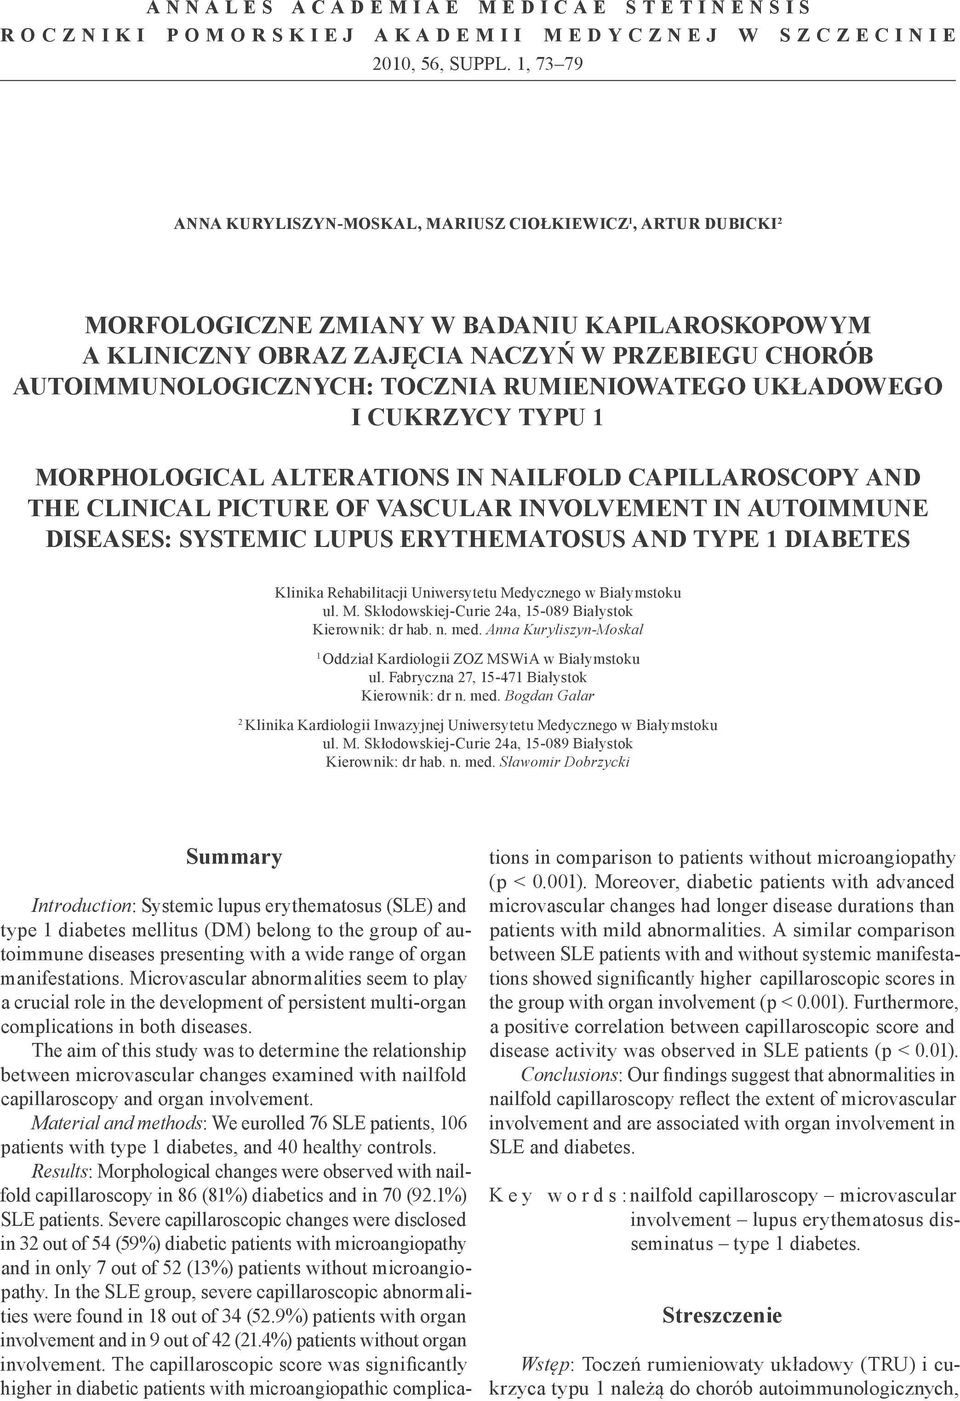 TOCZNIA RUMIENIOWATEGO UKŁADOWEGO I CUKRZYCY TYPU 1 MORPHOLOGICAL ALTERATIONS IN NAILFOLD CAPILLAROSCOPY AND THE CLINICAL PICTURE OF VASCULAR INVOLVEMENT IN AUTOIMMUNE DISEASES: SYSTEMIC LUPUS